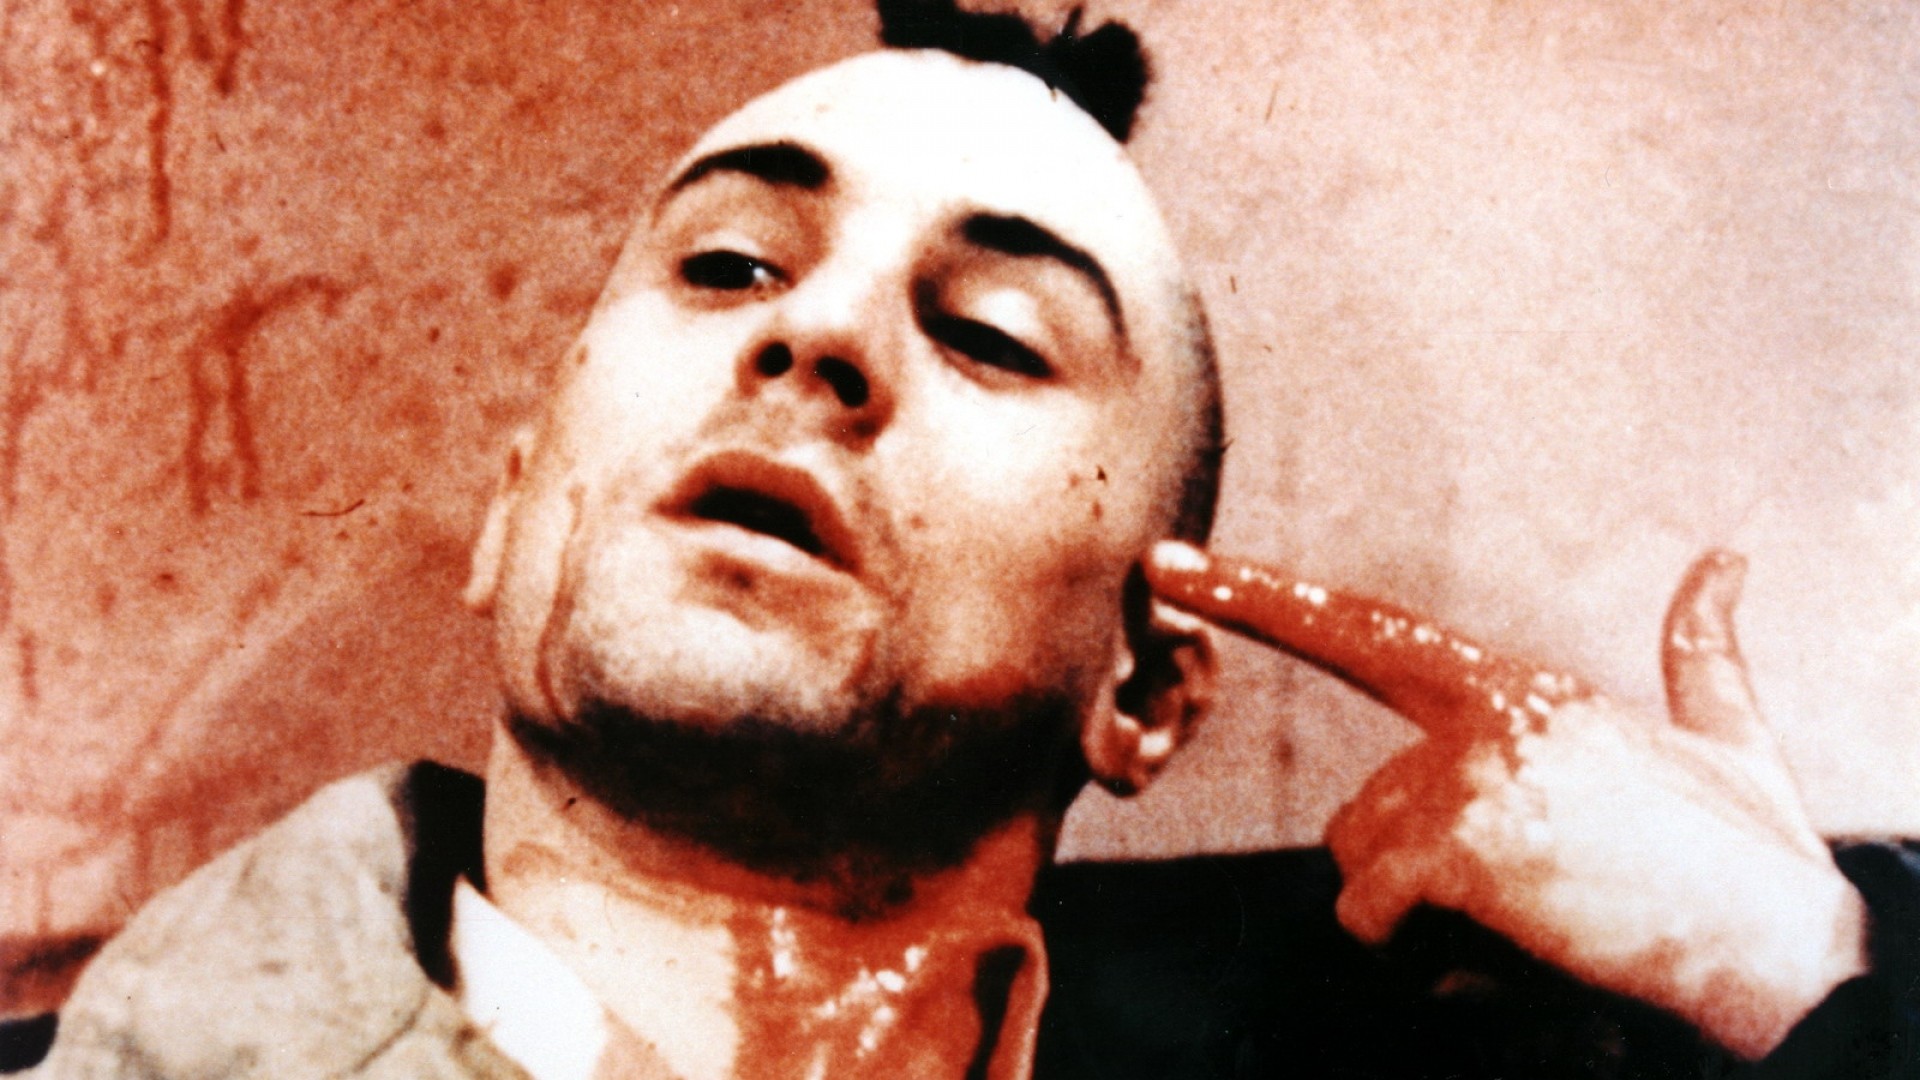 1920x1080 Get the latest taxi driver, travis bickle, robert de niro news, pictures  and videos and learn all about taxi driver, travis bickle, robert de niro  from ...